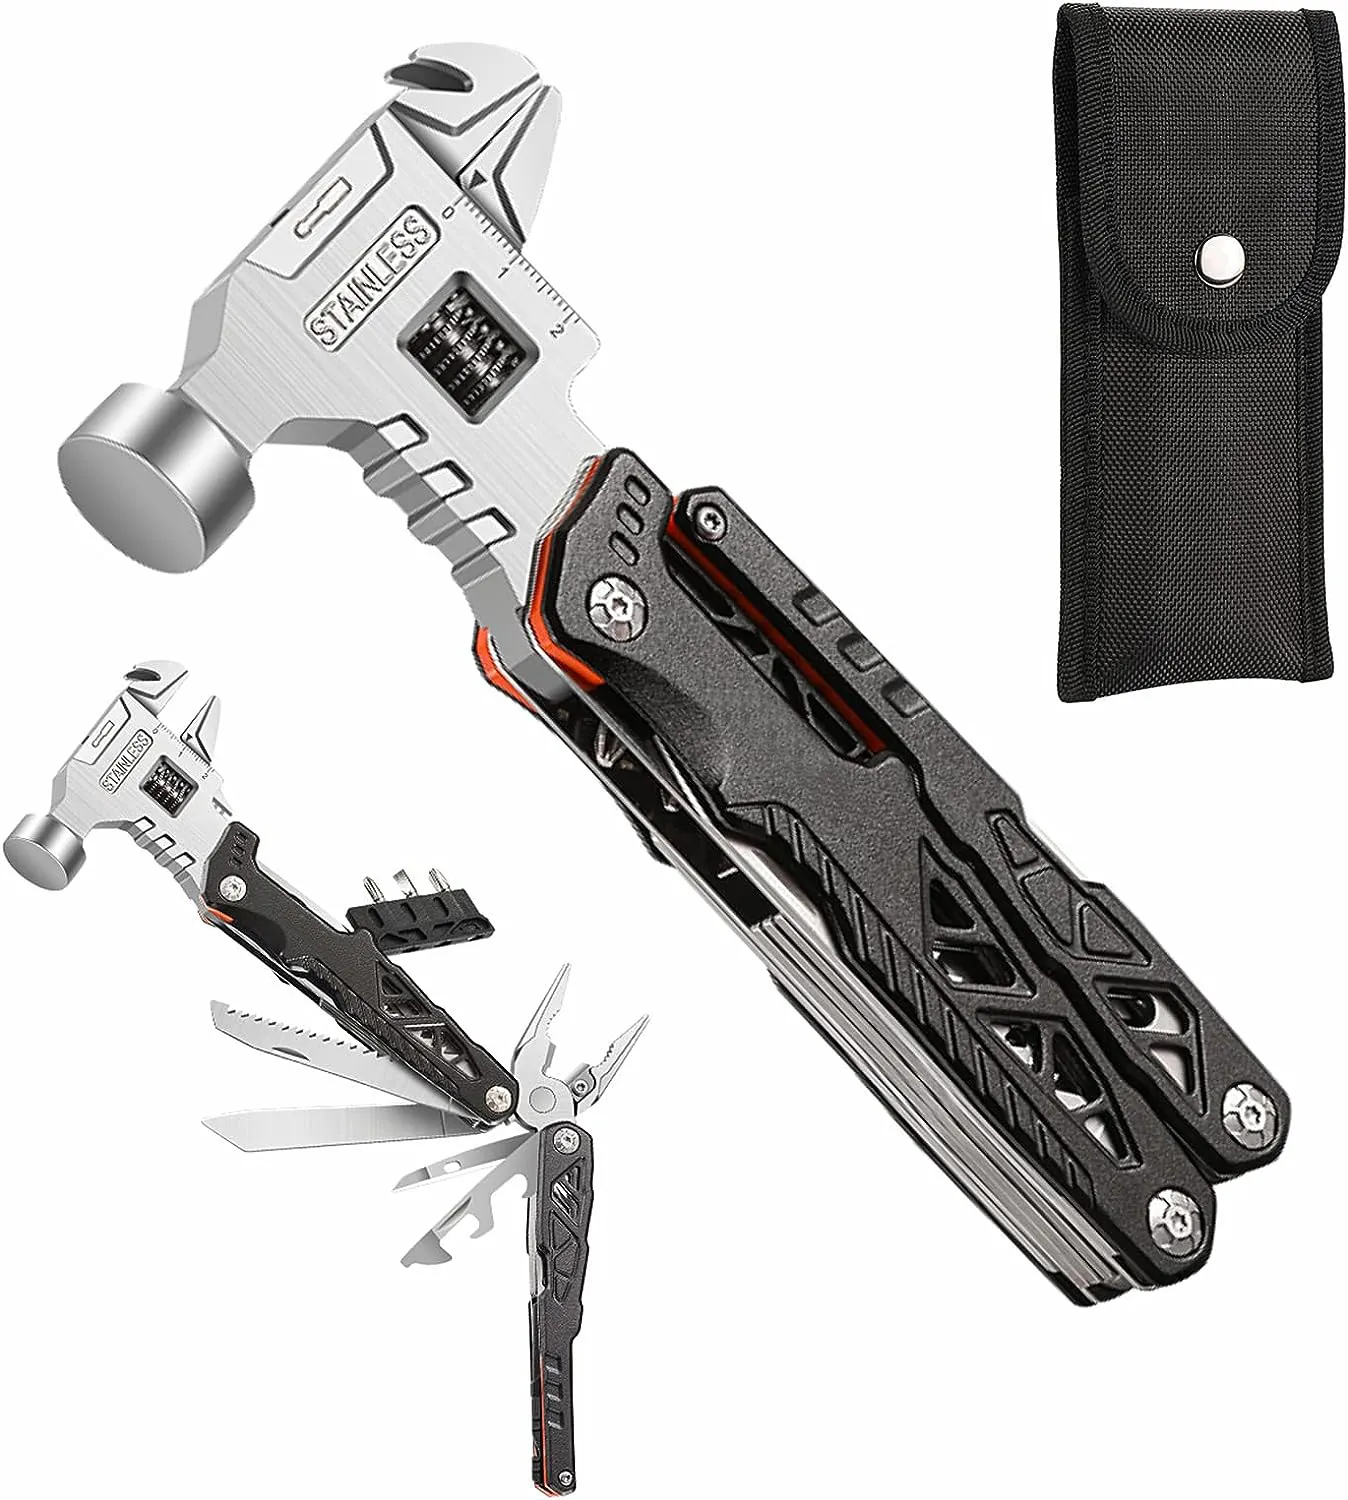 2024 New Multitool Hammer 18 in 1 Pocket Multi Tool Knife with Spring-Action Pliers for Camping Survival